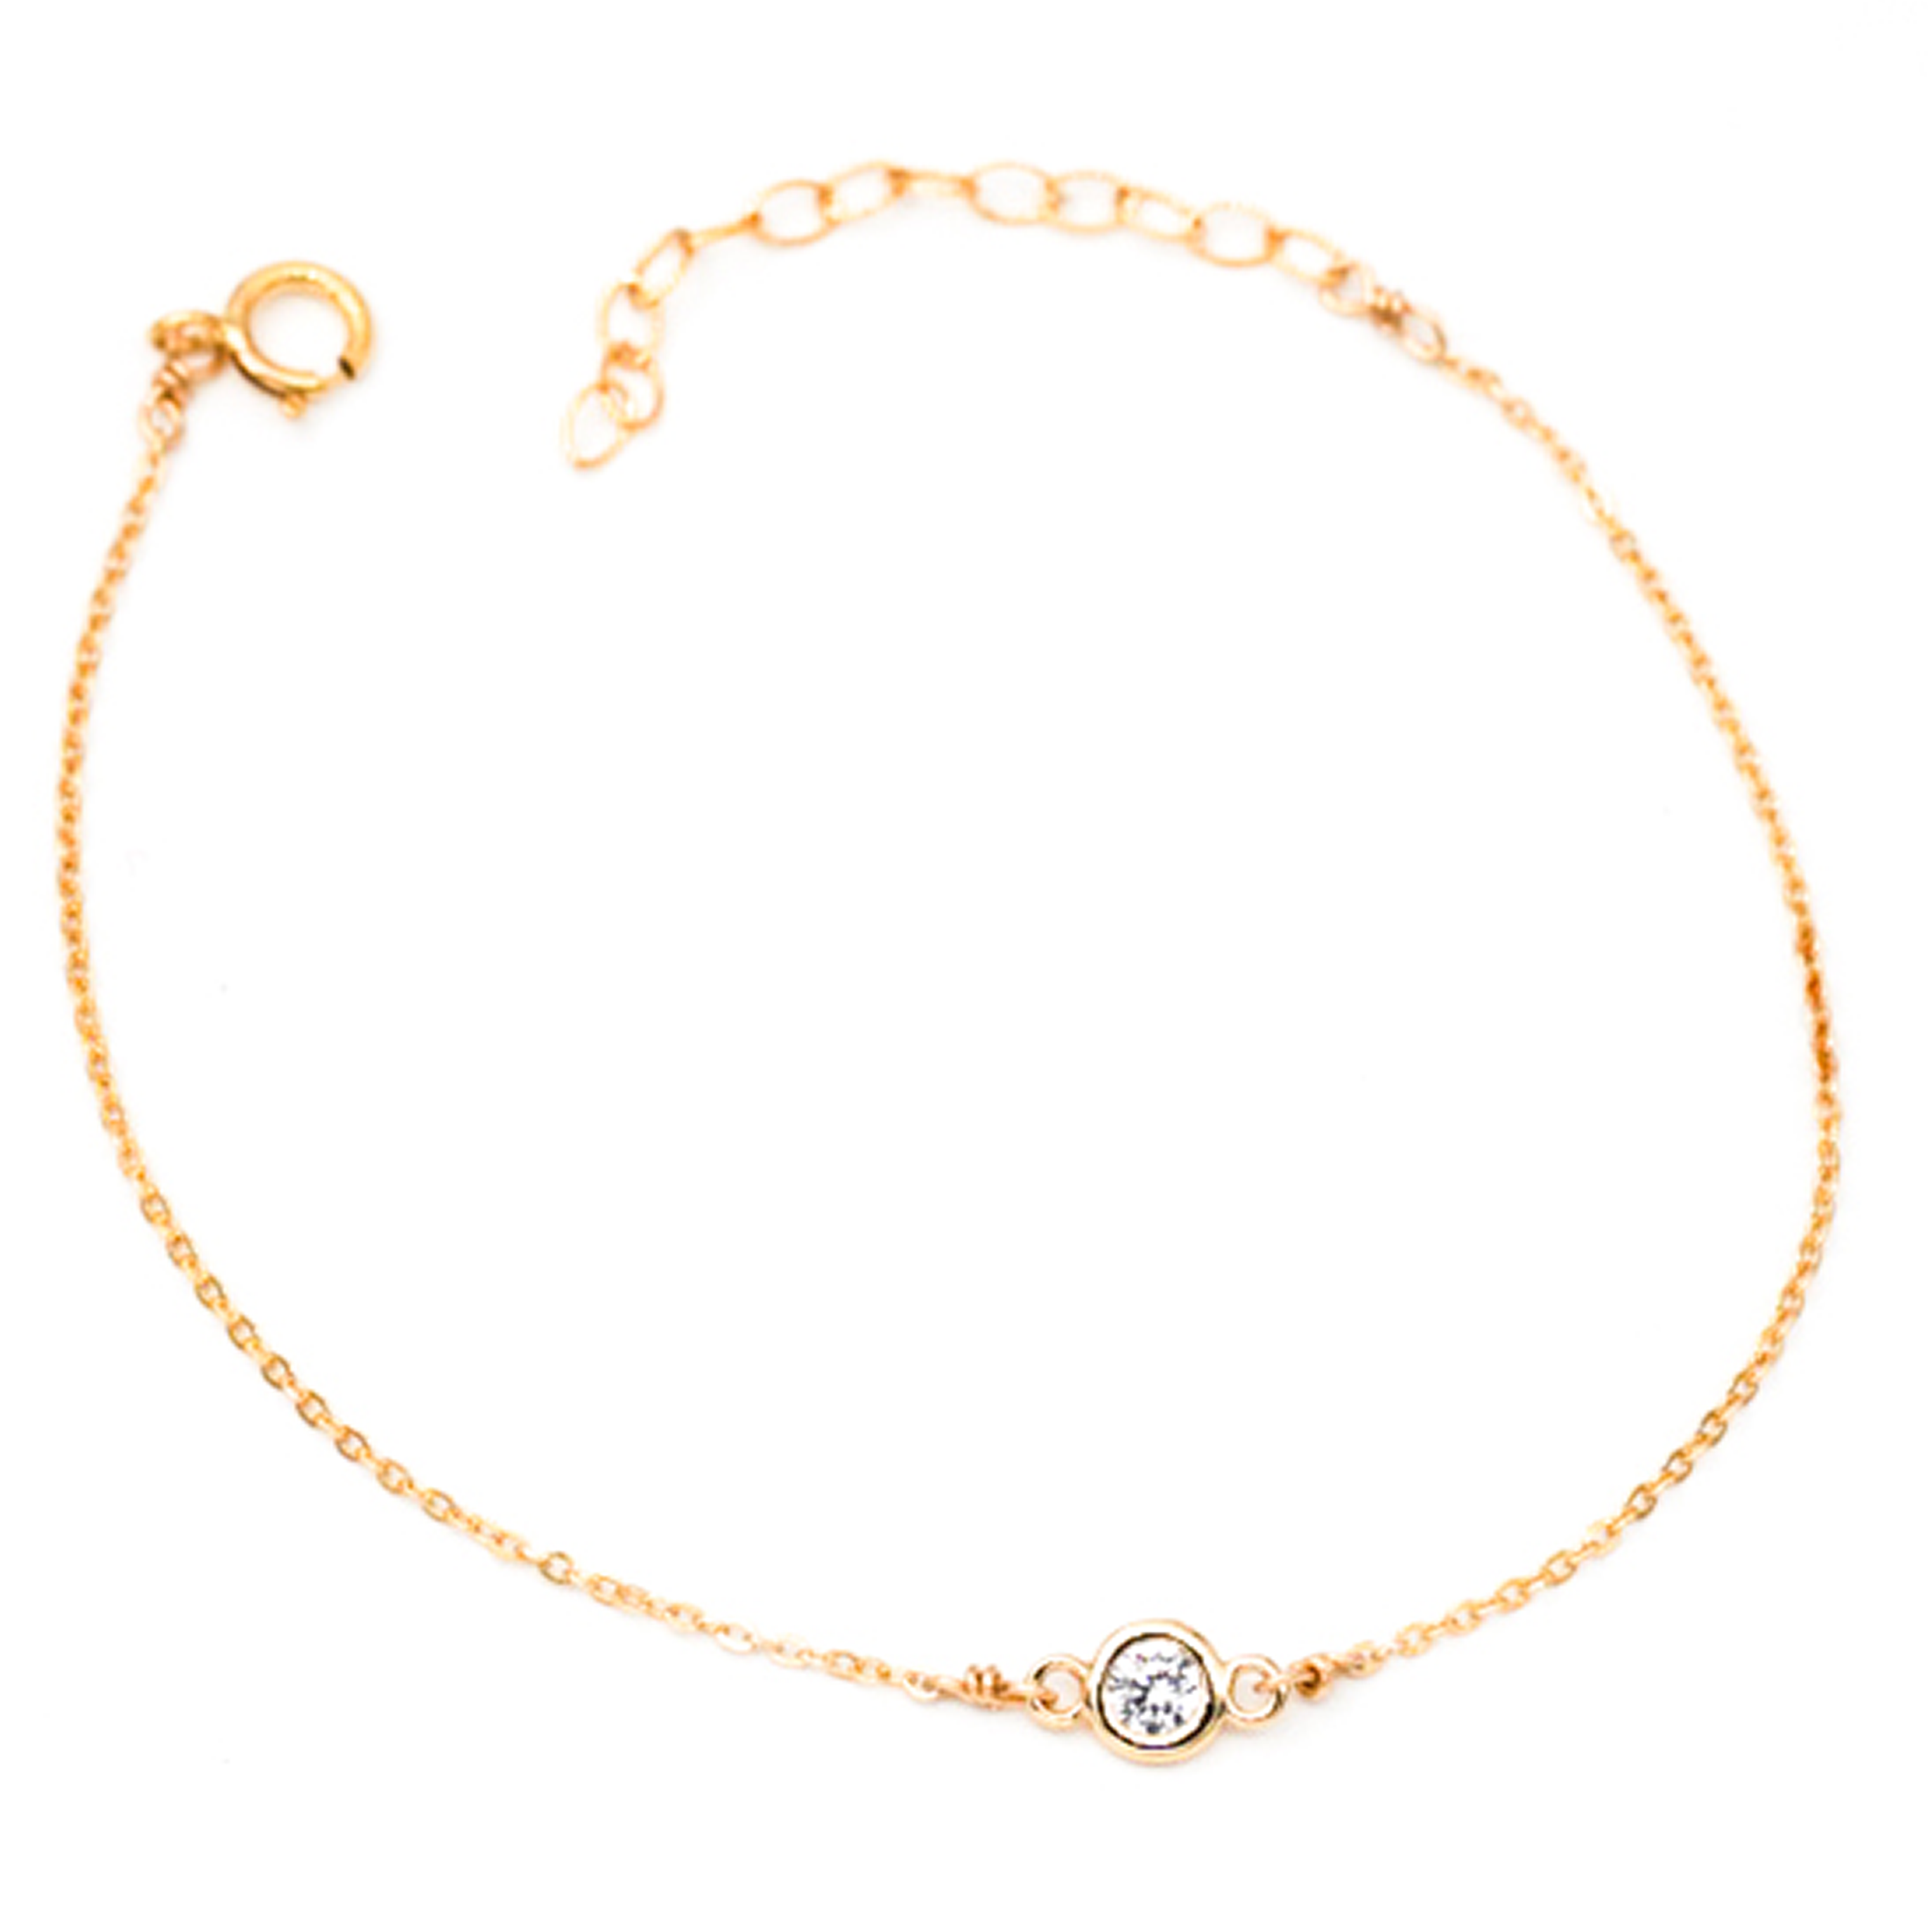 Dainty gold chain with small circular diamond in center.